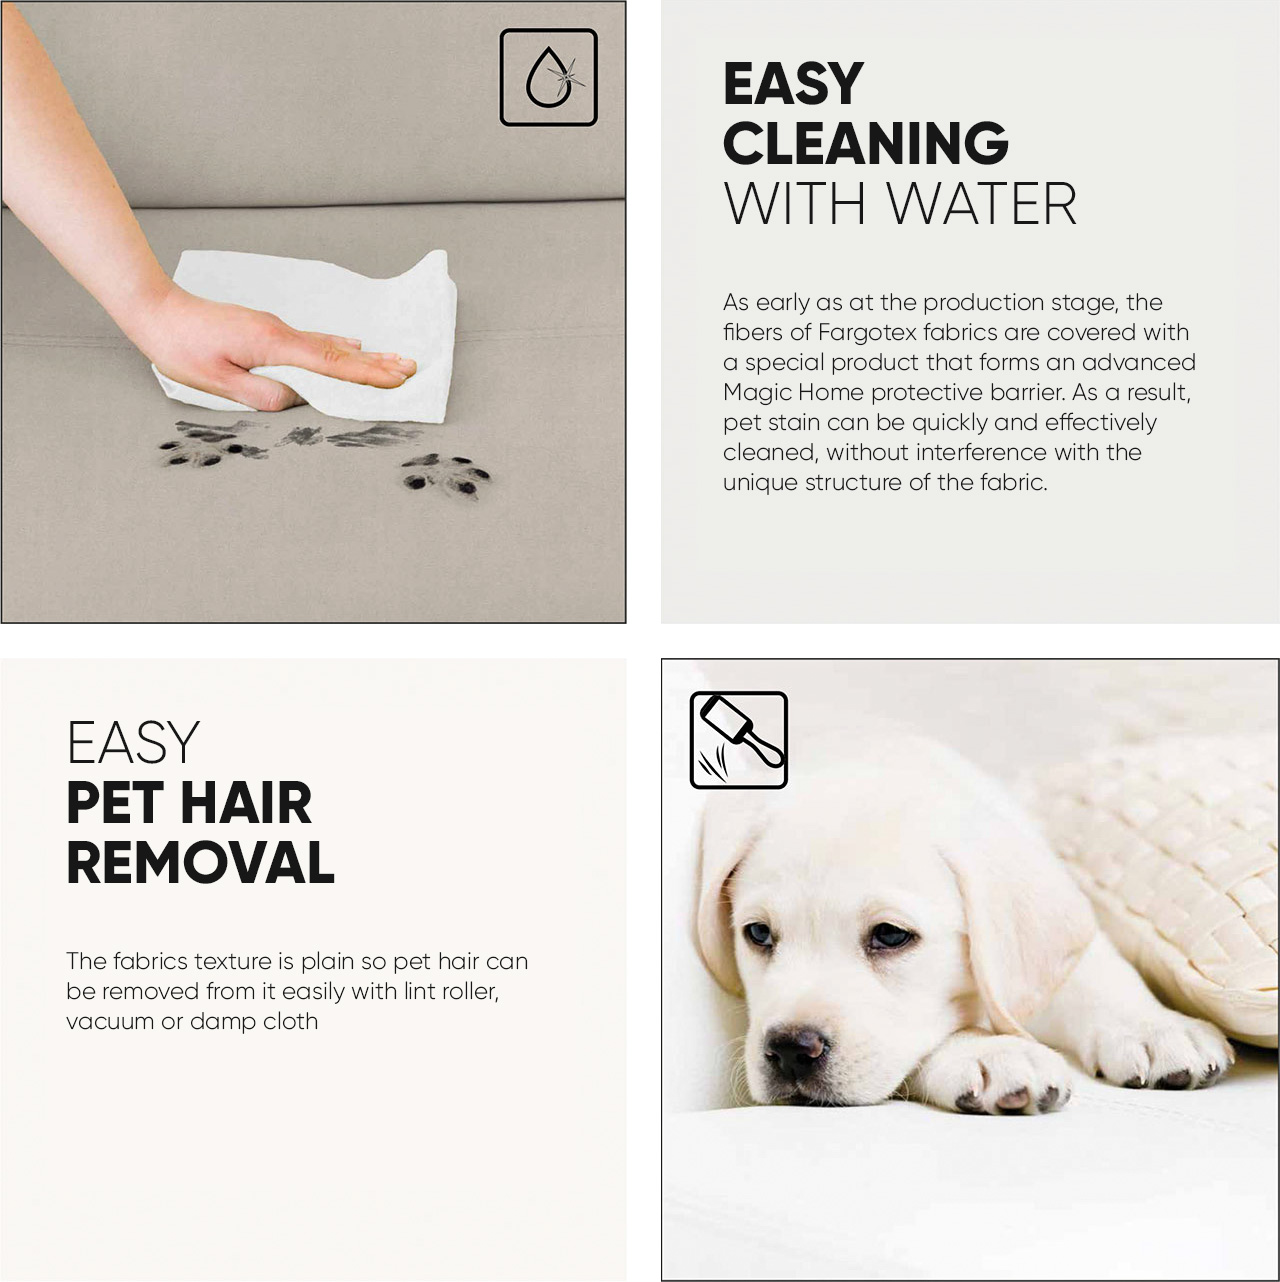 Pet-friendly fabrics for your home. Magic Home technology by Fargotex.